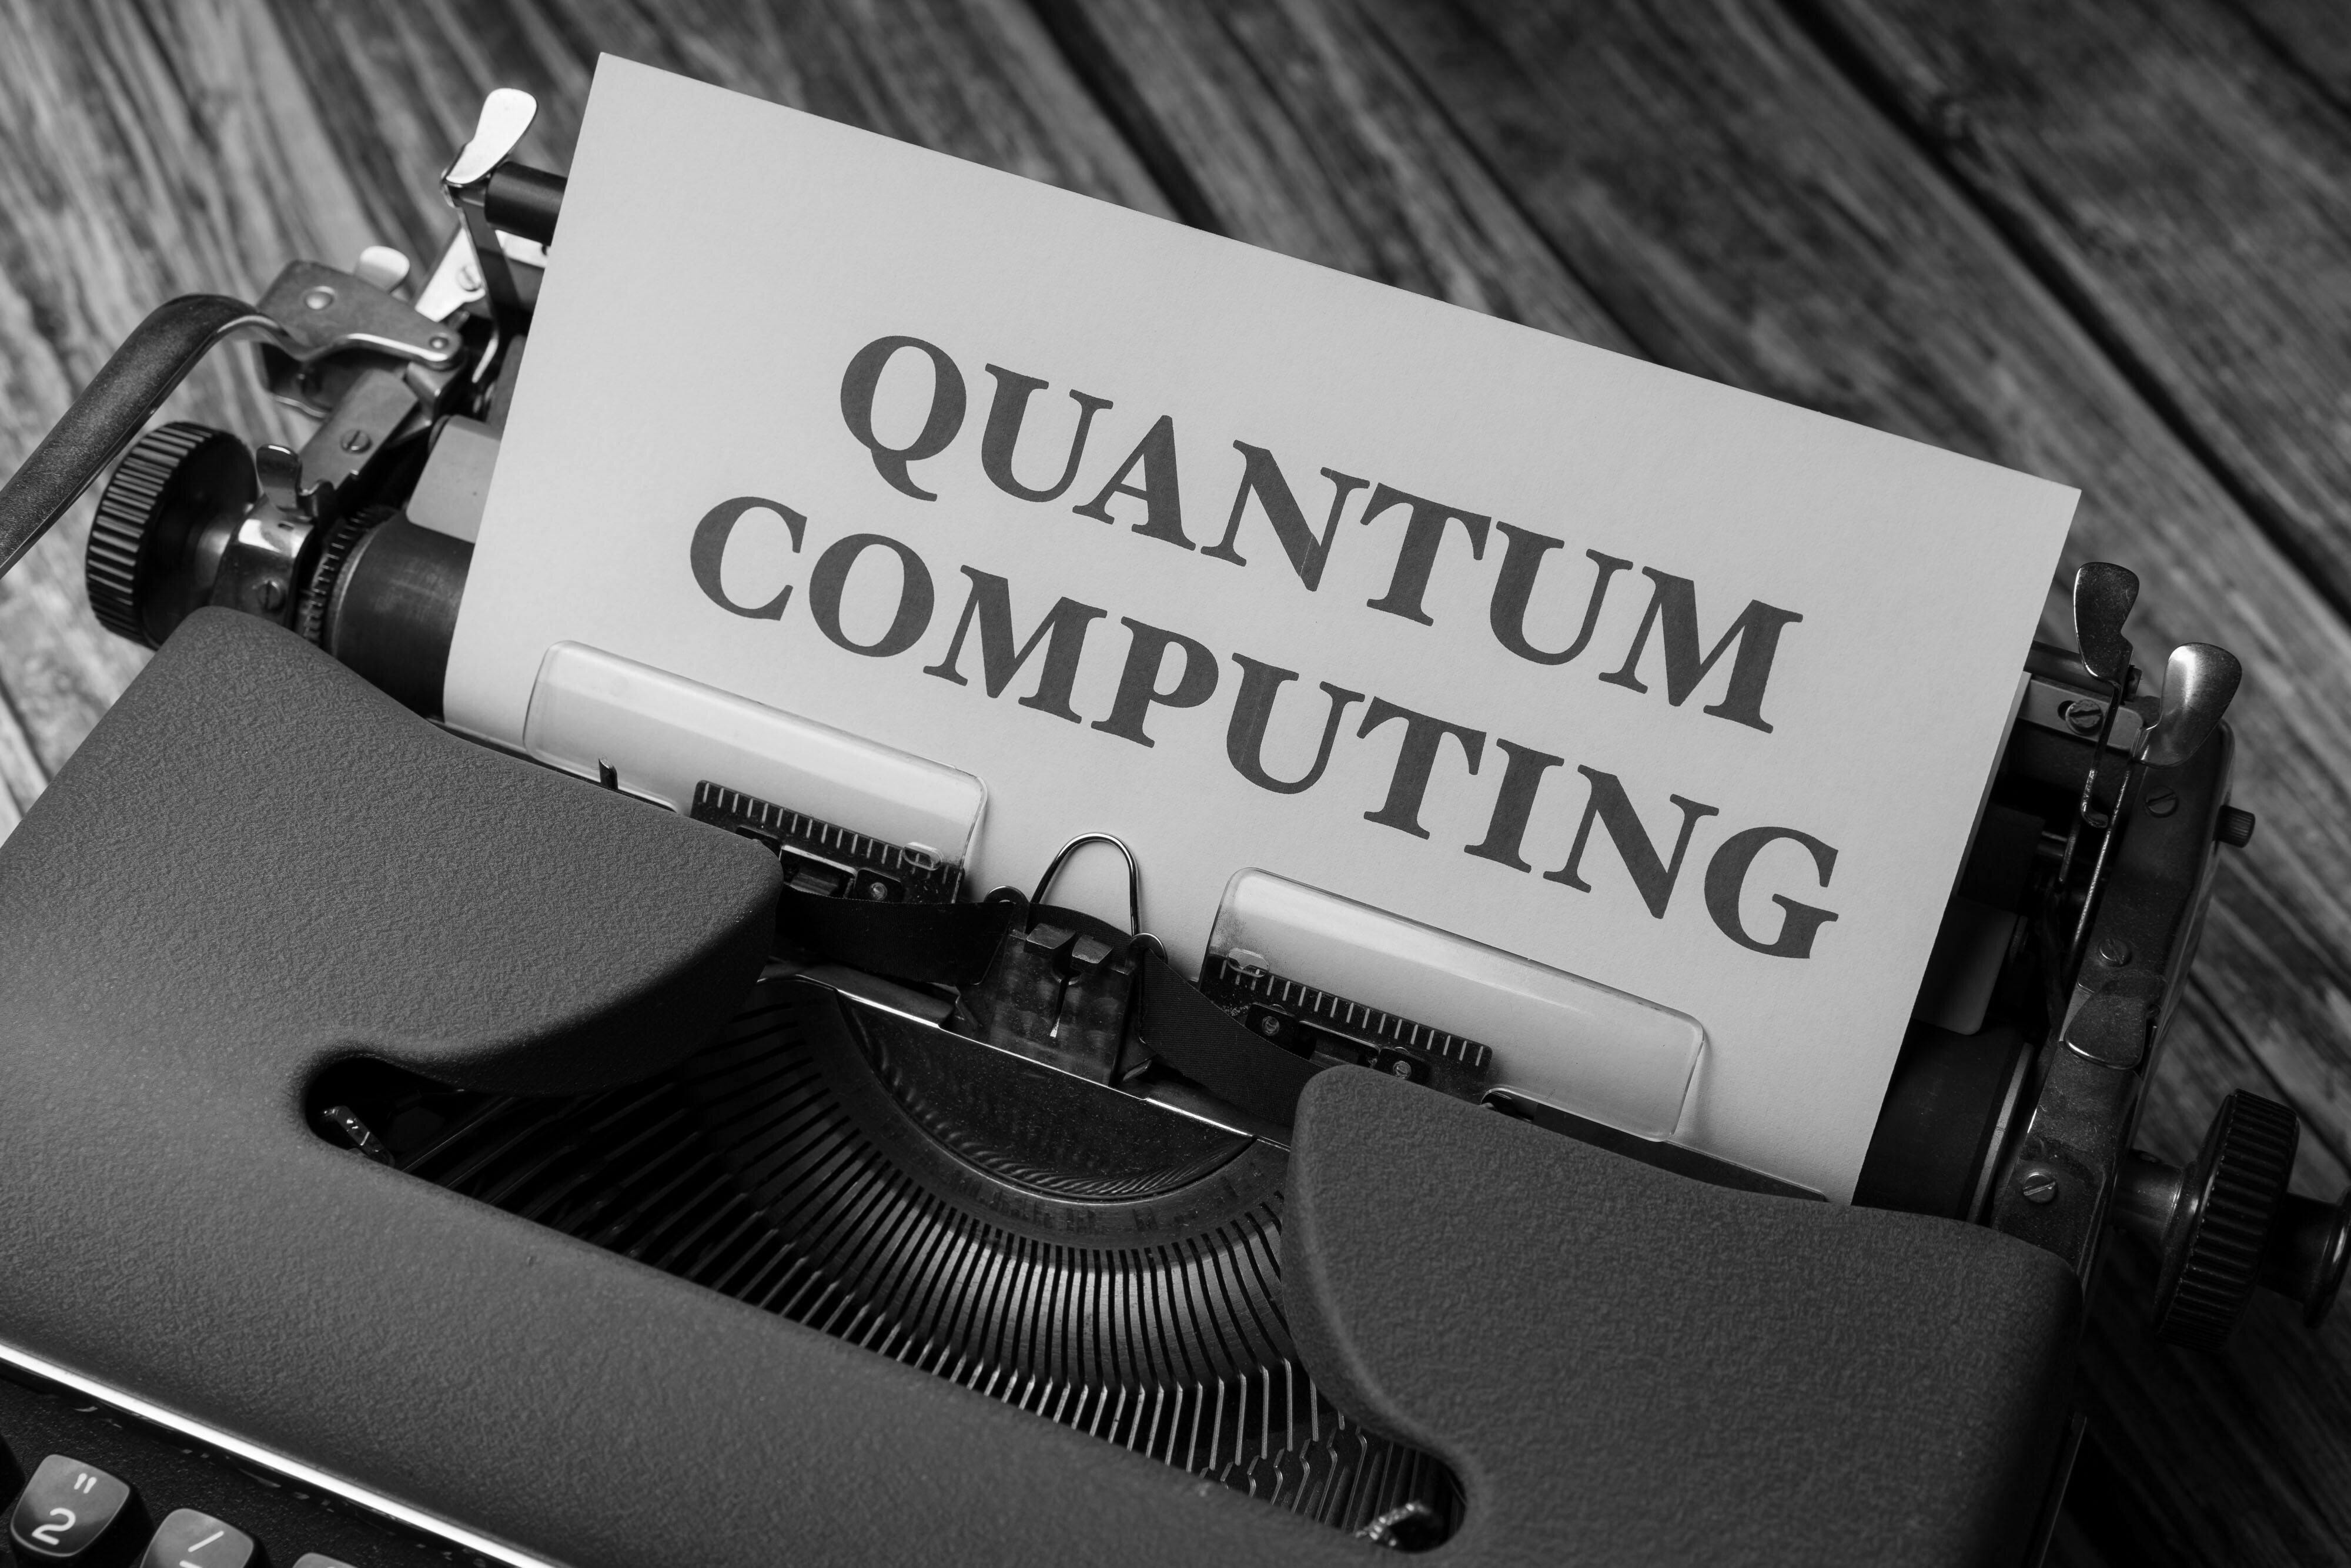 The future of quantum computing: application & technology